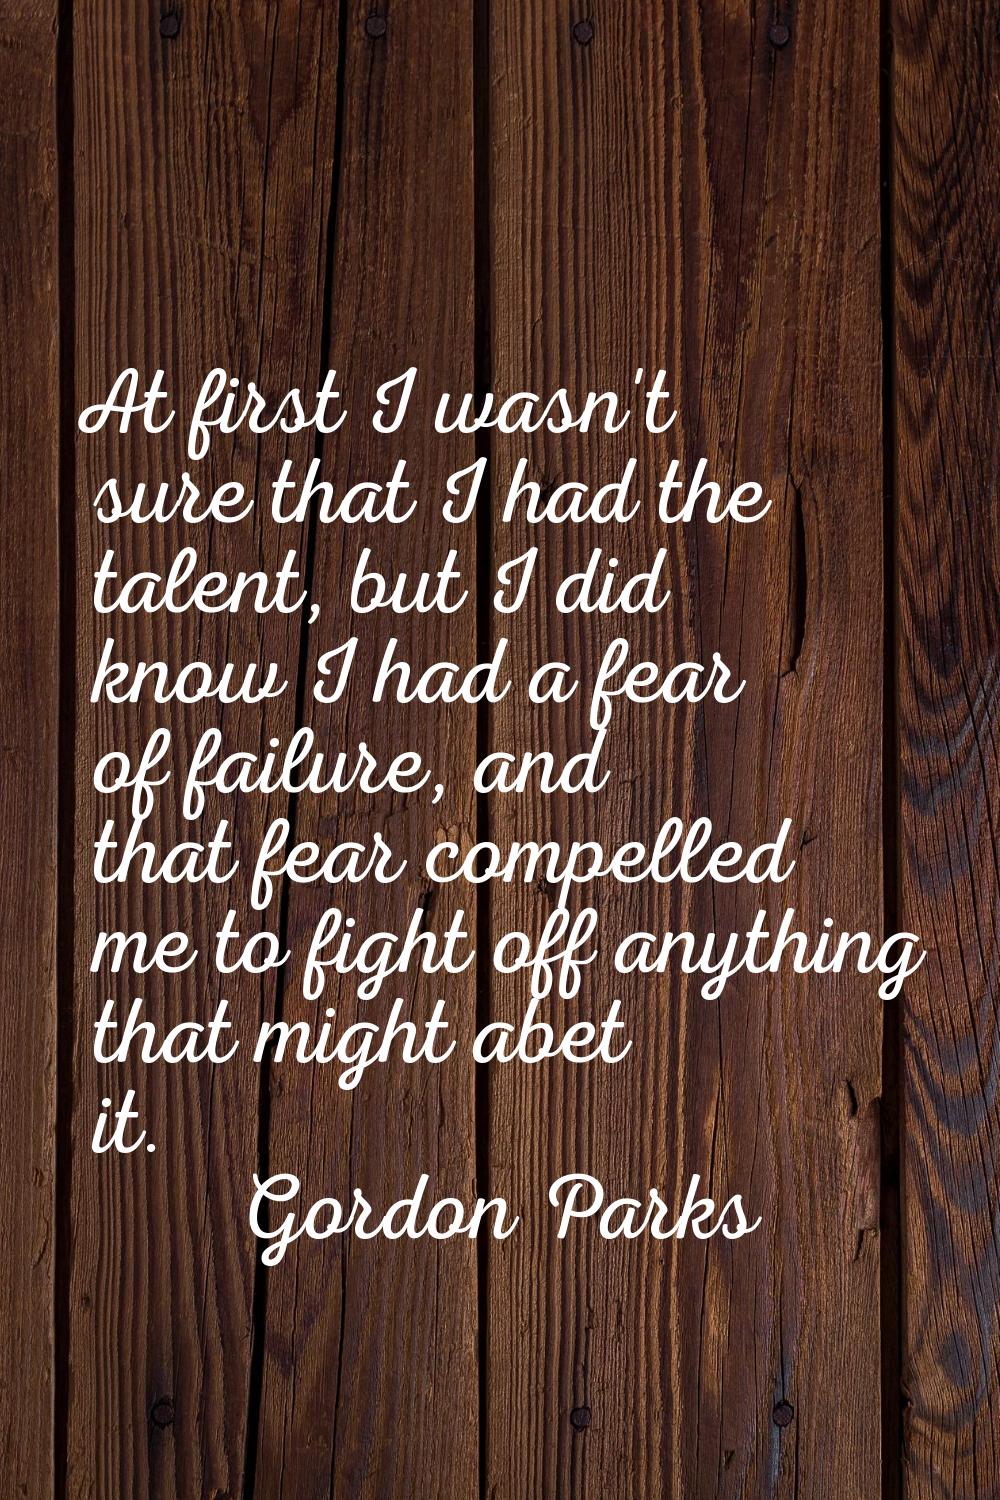 At first I wasn't sure that I had the talent, but I did know I had a fear of failure, and that fear